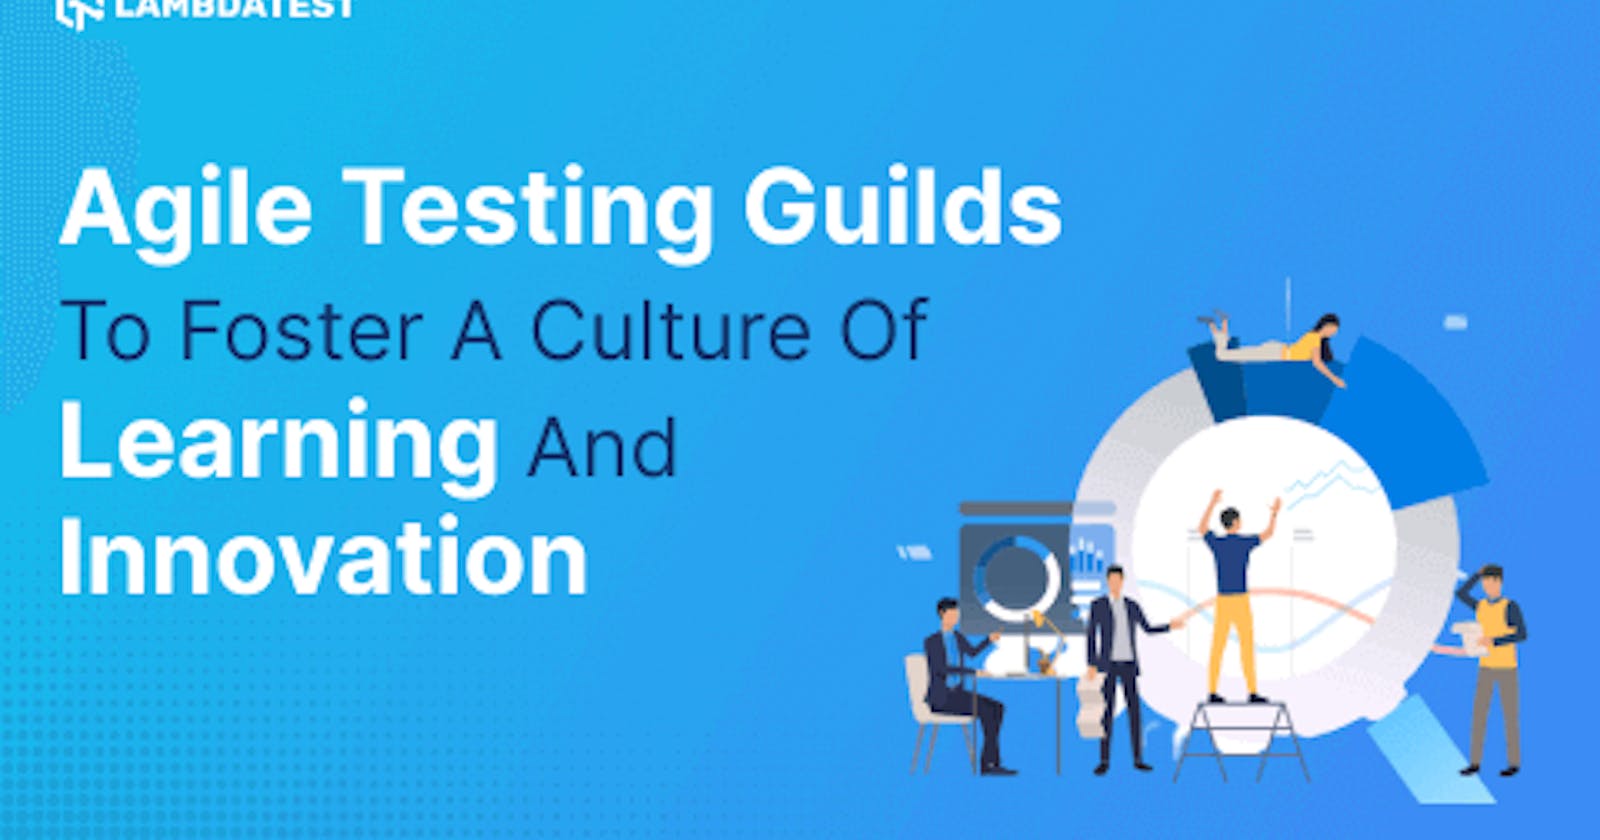 Agile Testing Guilds to Foster a Culture of Learning and Innovation